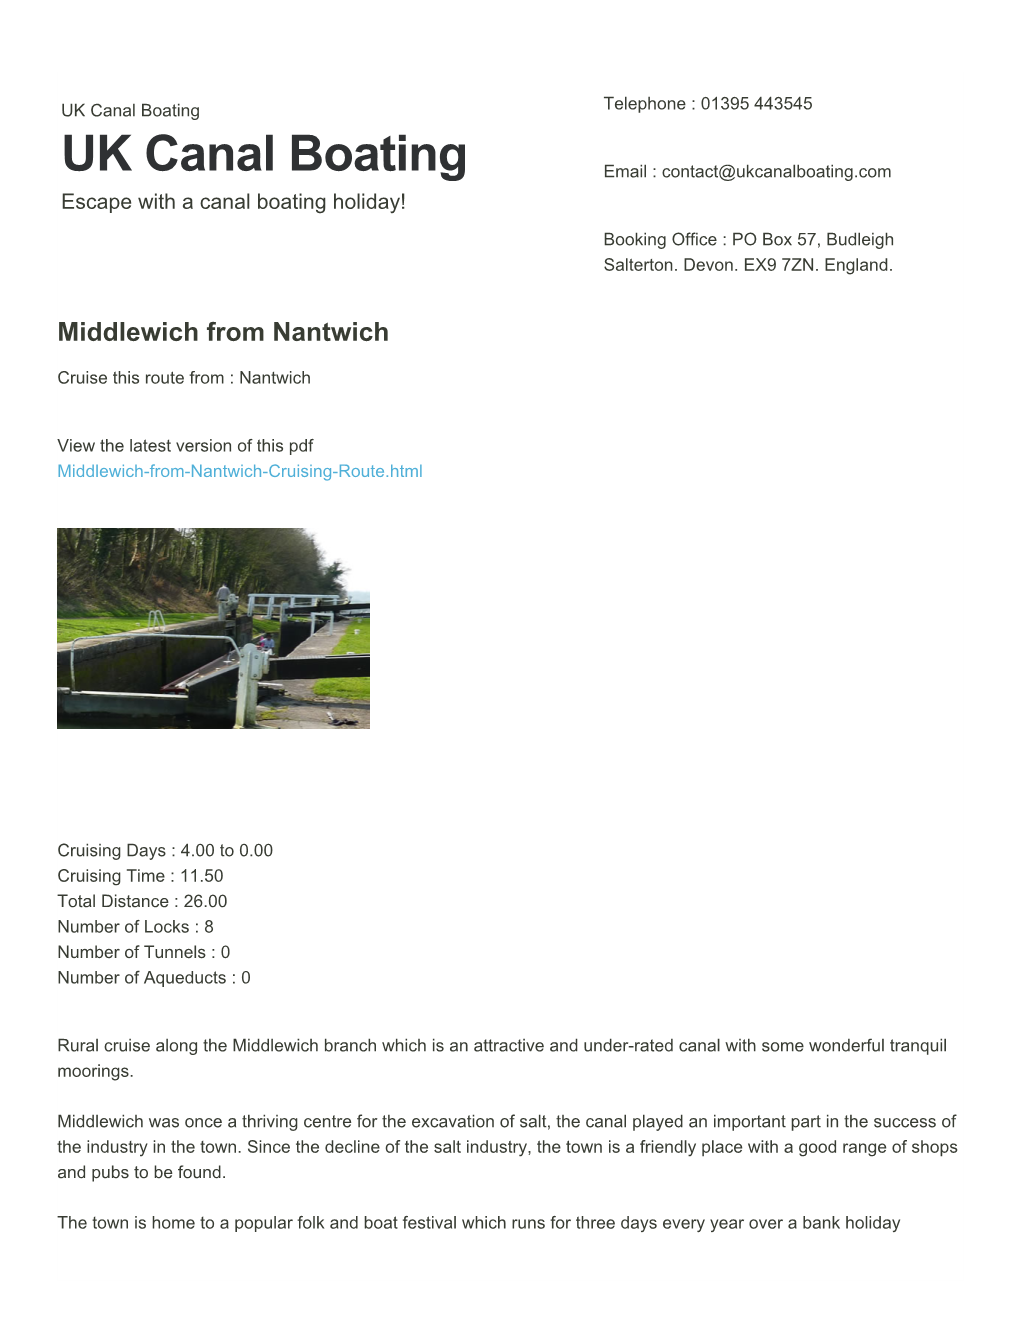 Middlewich from Nantwich | UK Canal Boating